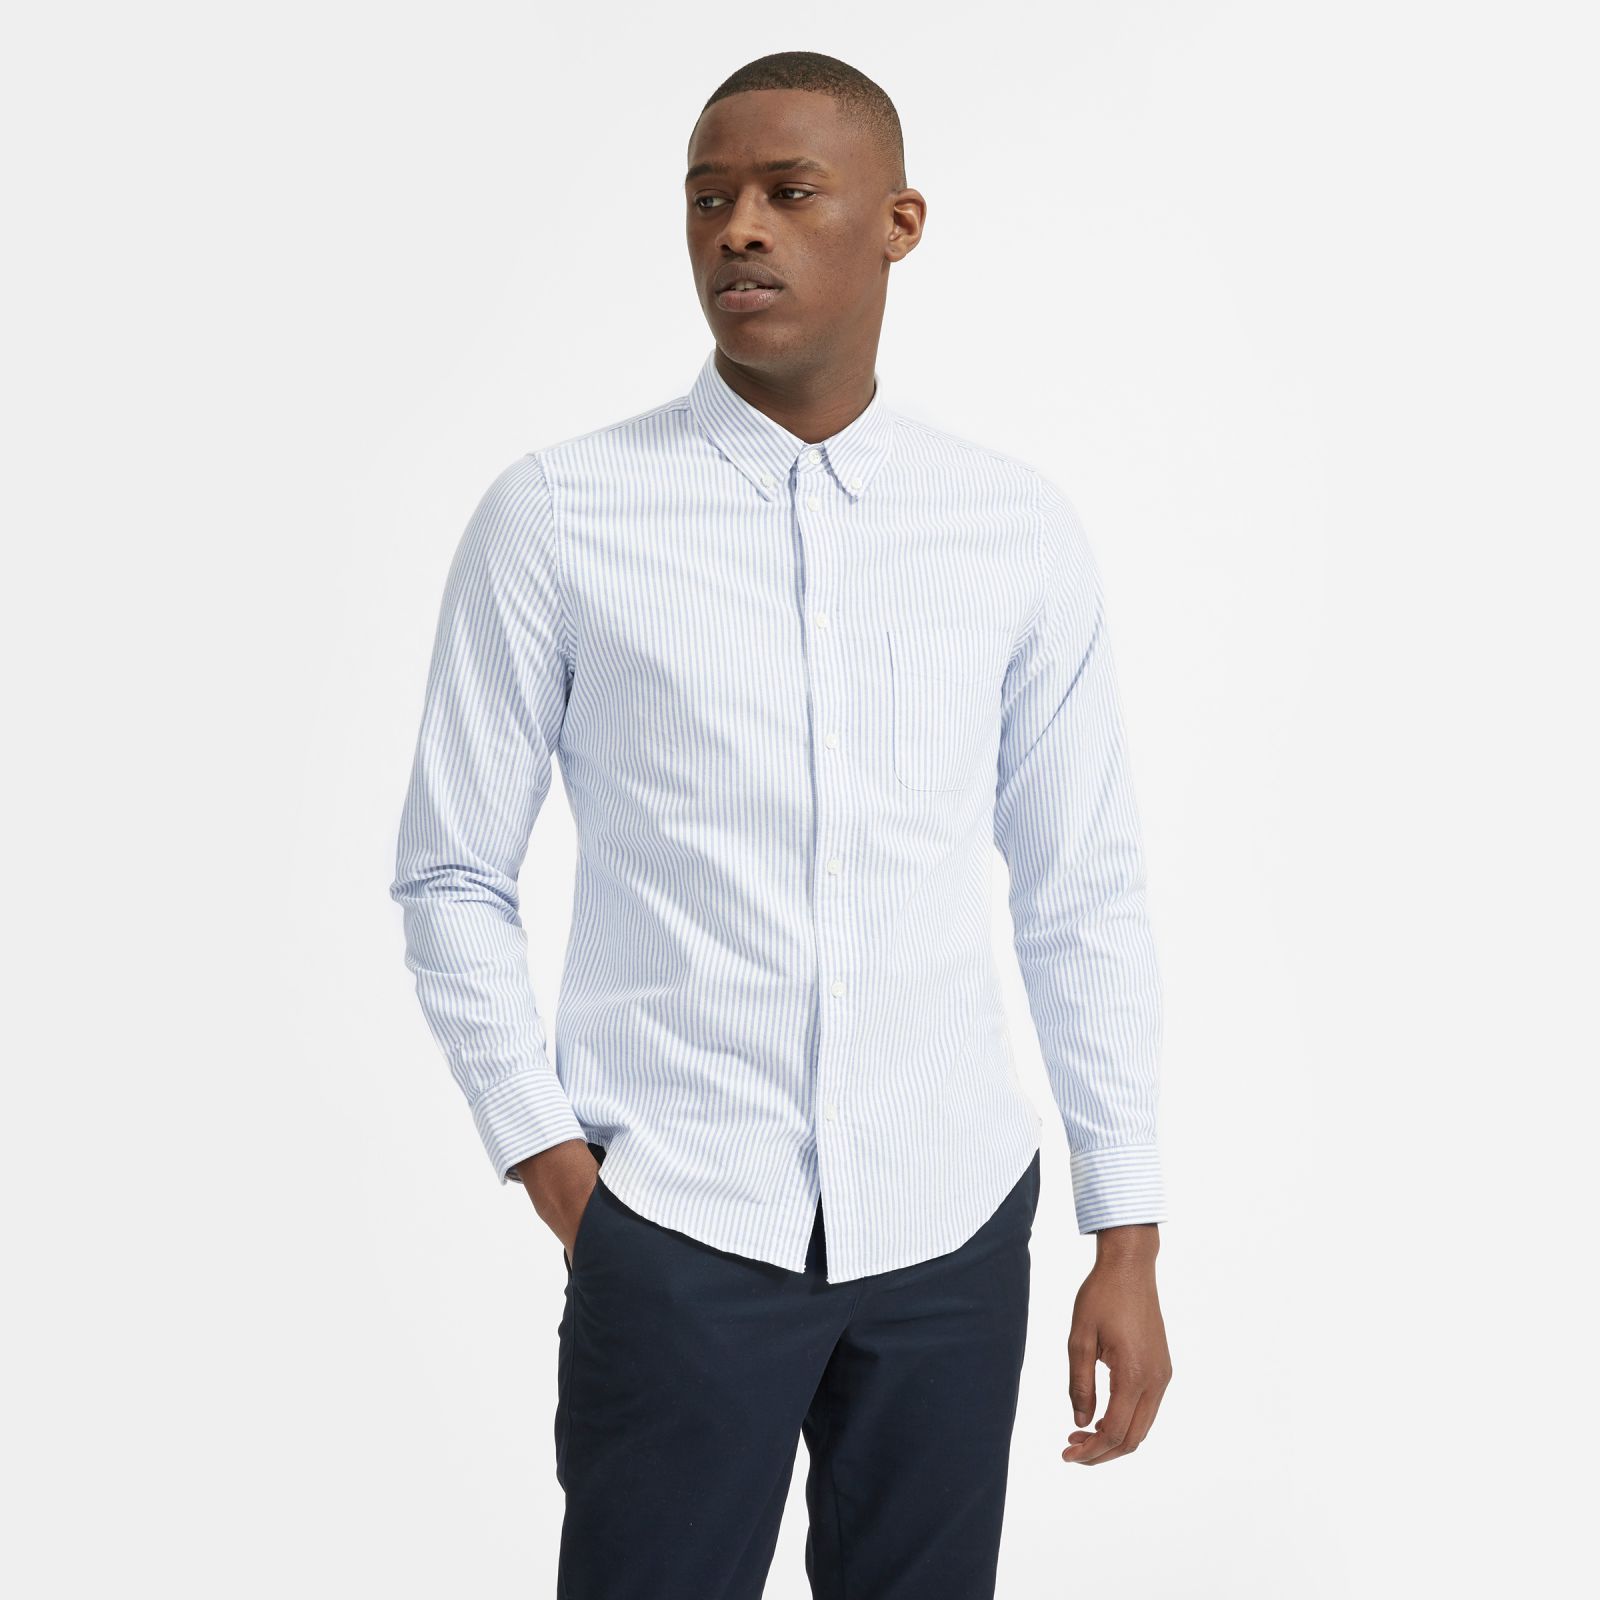 Men's Japanese Slim Fit Oxford Shirt by Everlane in White/Blue, Size XS | Everlane